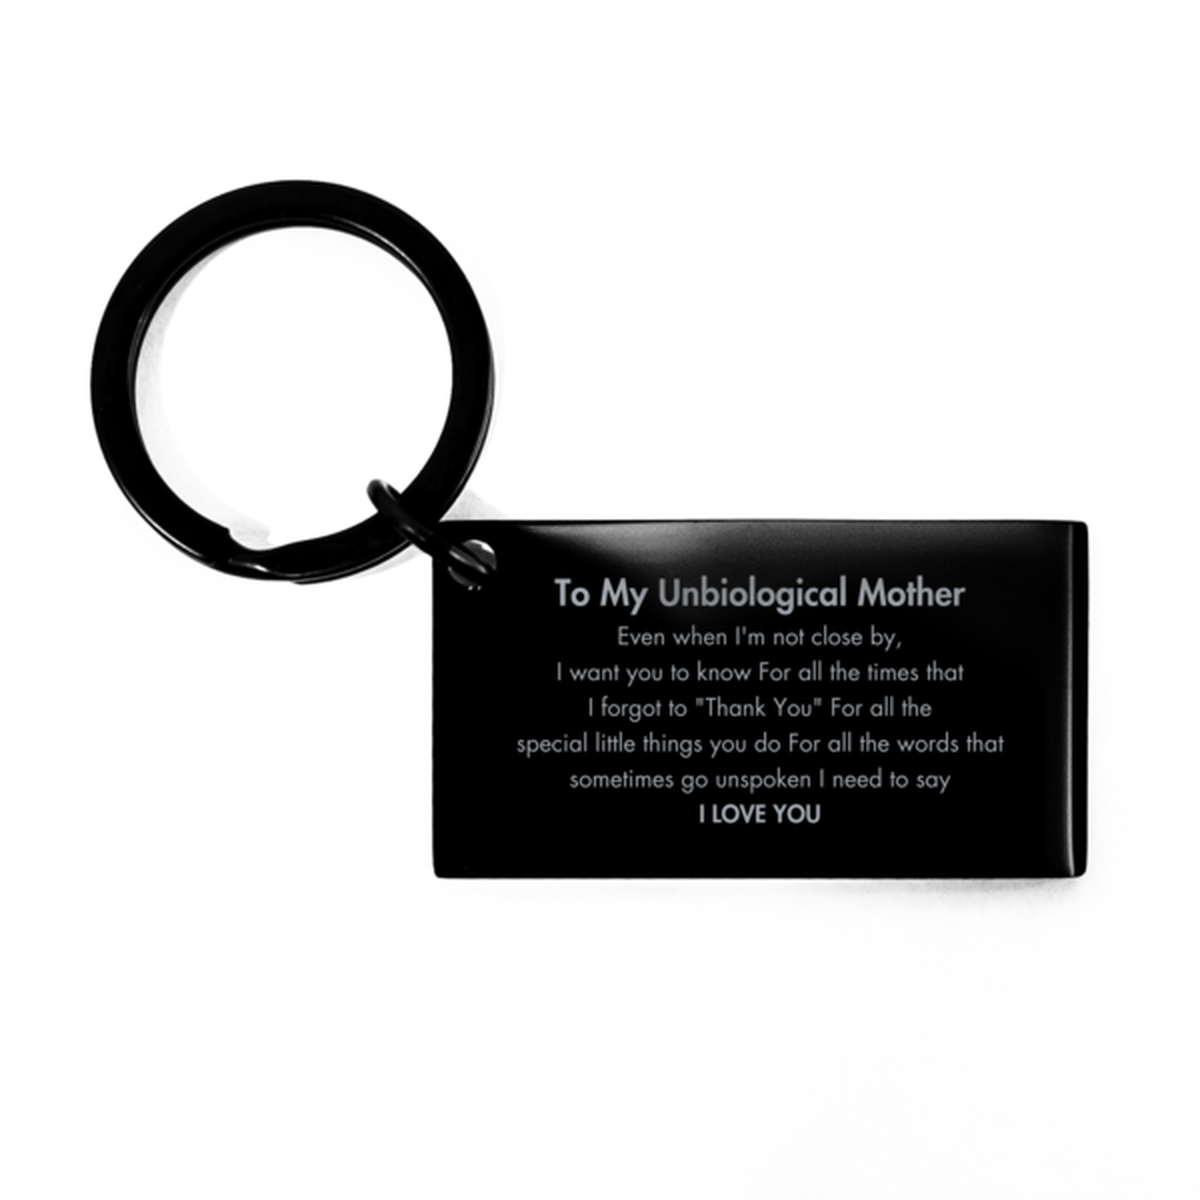 Thank You Gifts for Unbiological Mother, Keepsake Keychain Gifts for Unbiological Mother Birthday Mother's day Father's Day Unbiological Mother For all the words That sometimes go unspoken I need to say I LOVE YOU